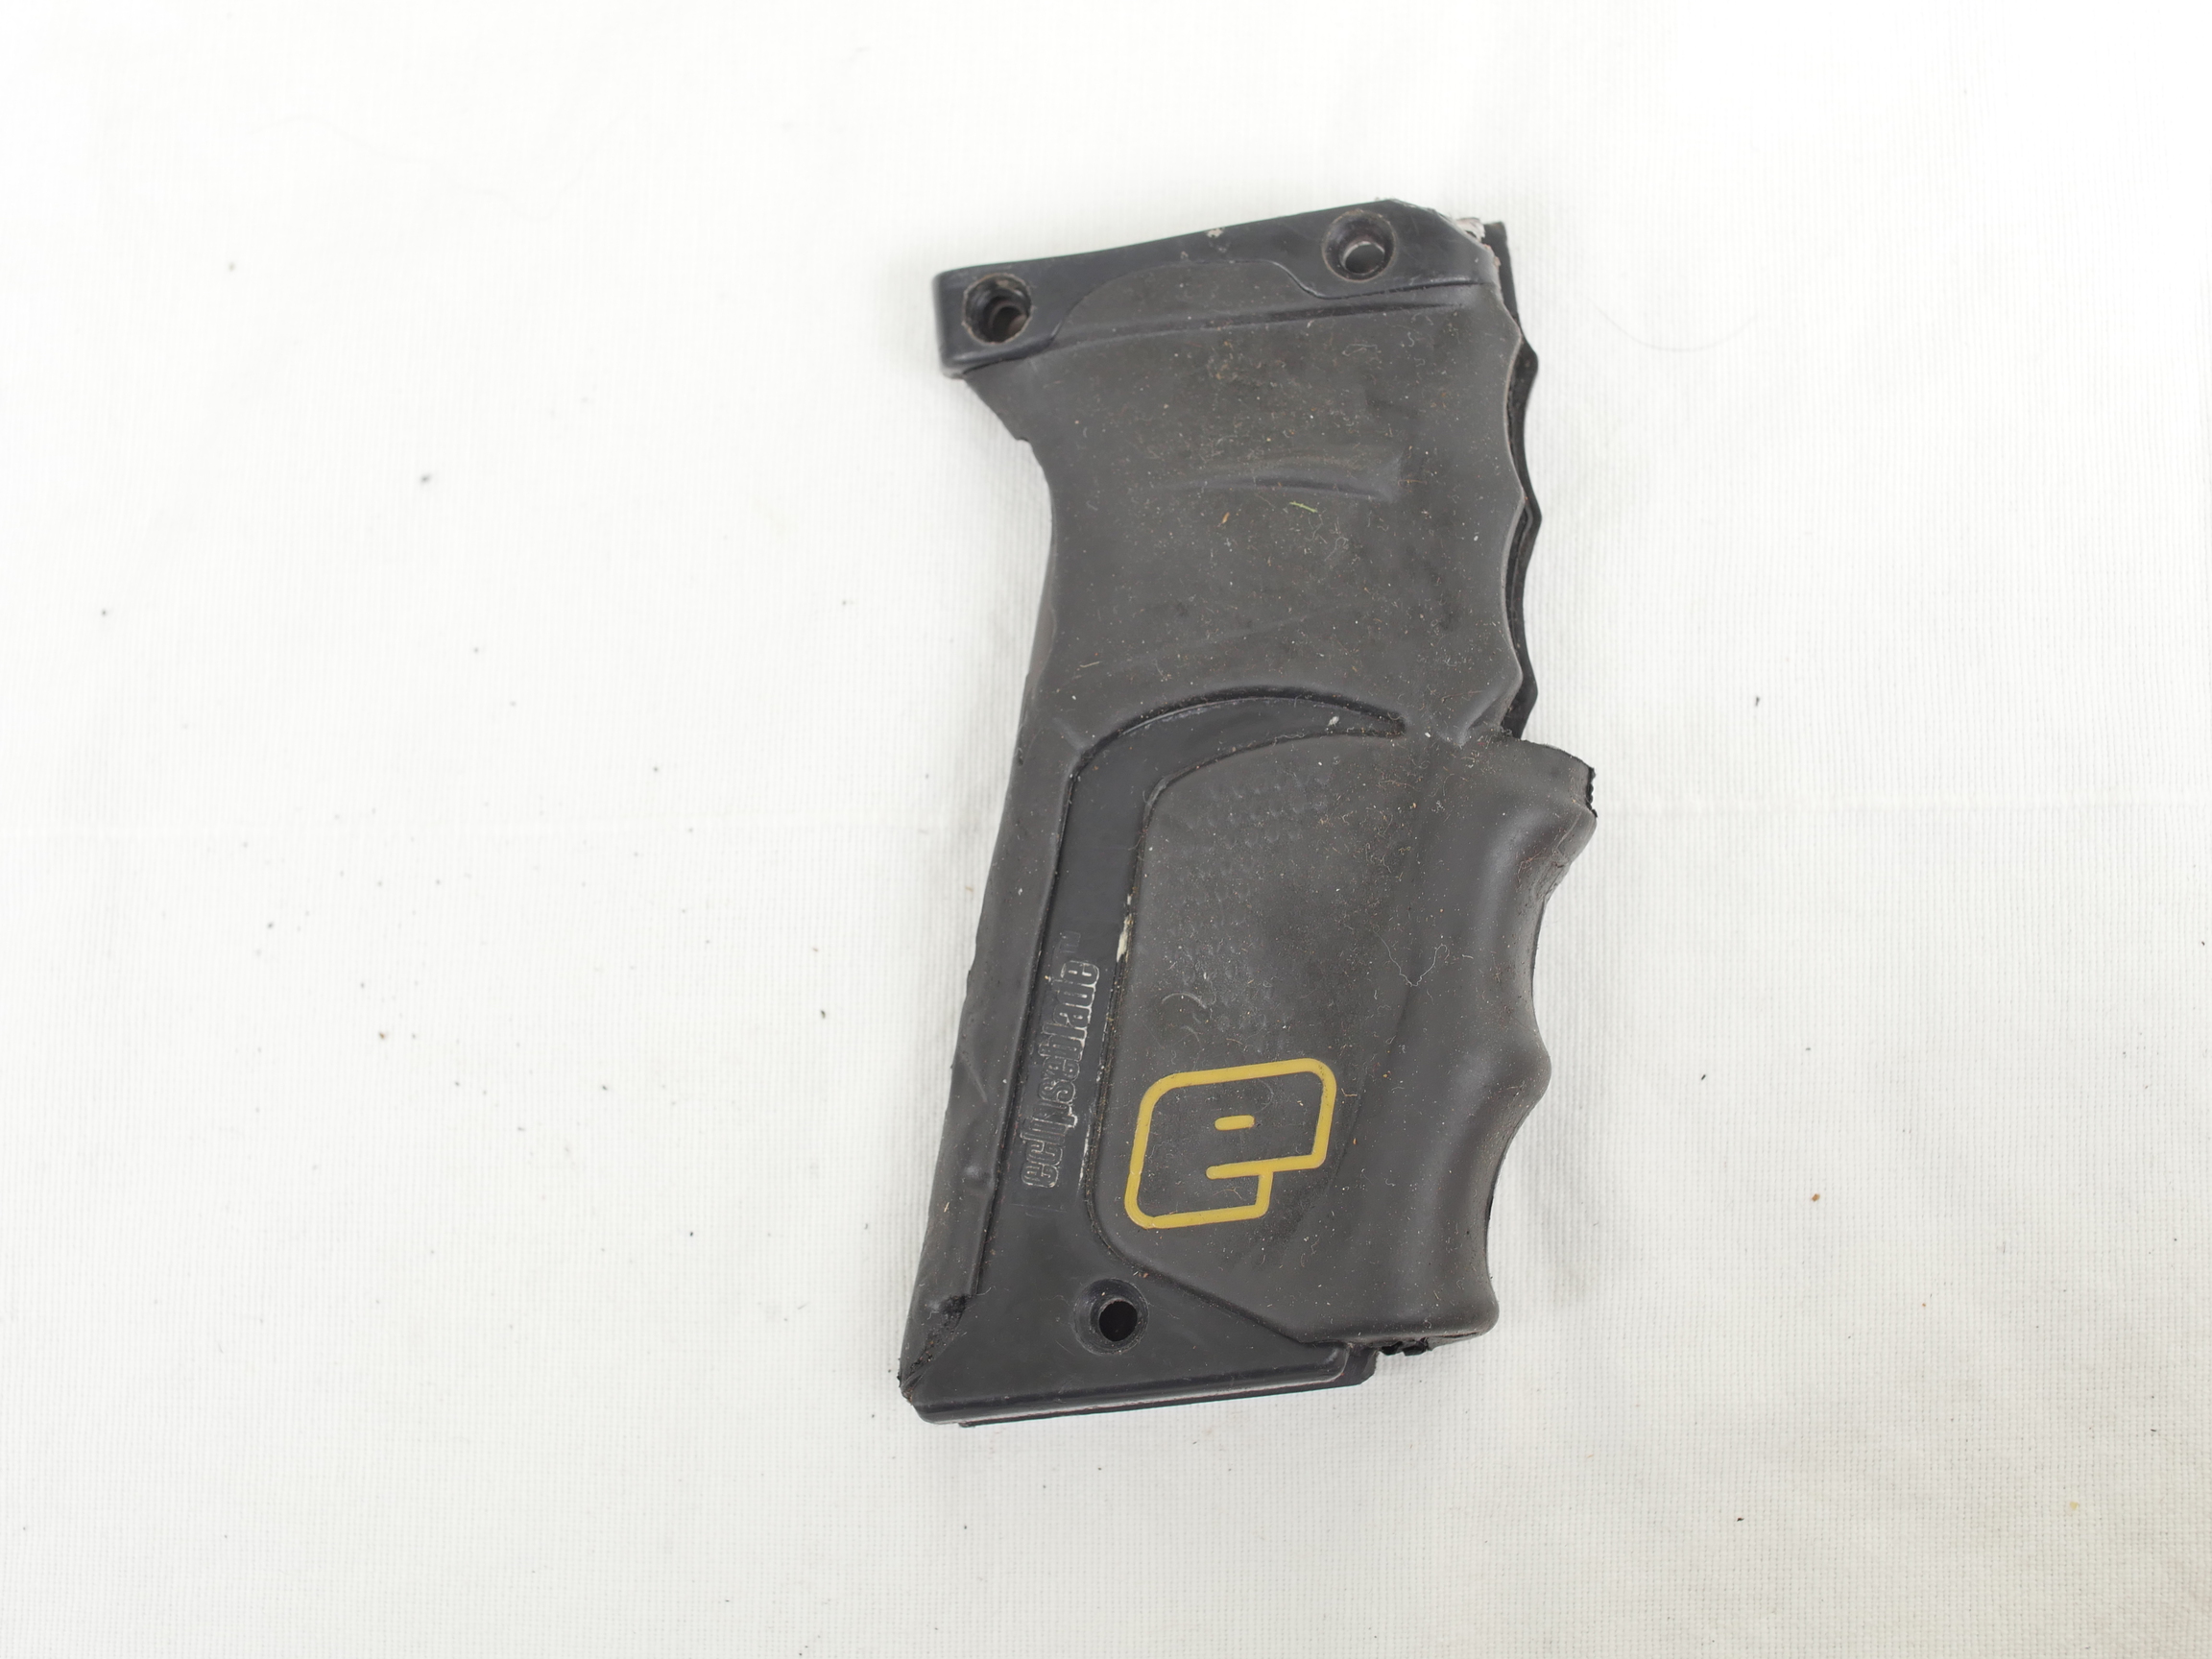 Eblade E2 grips, used shape, might have portion cut, see photos